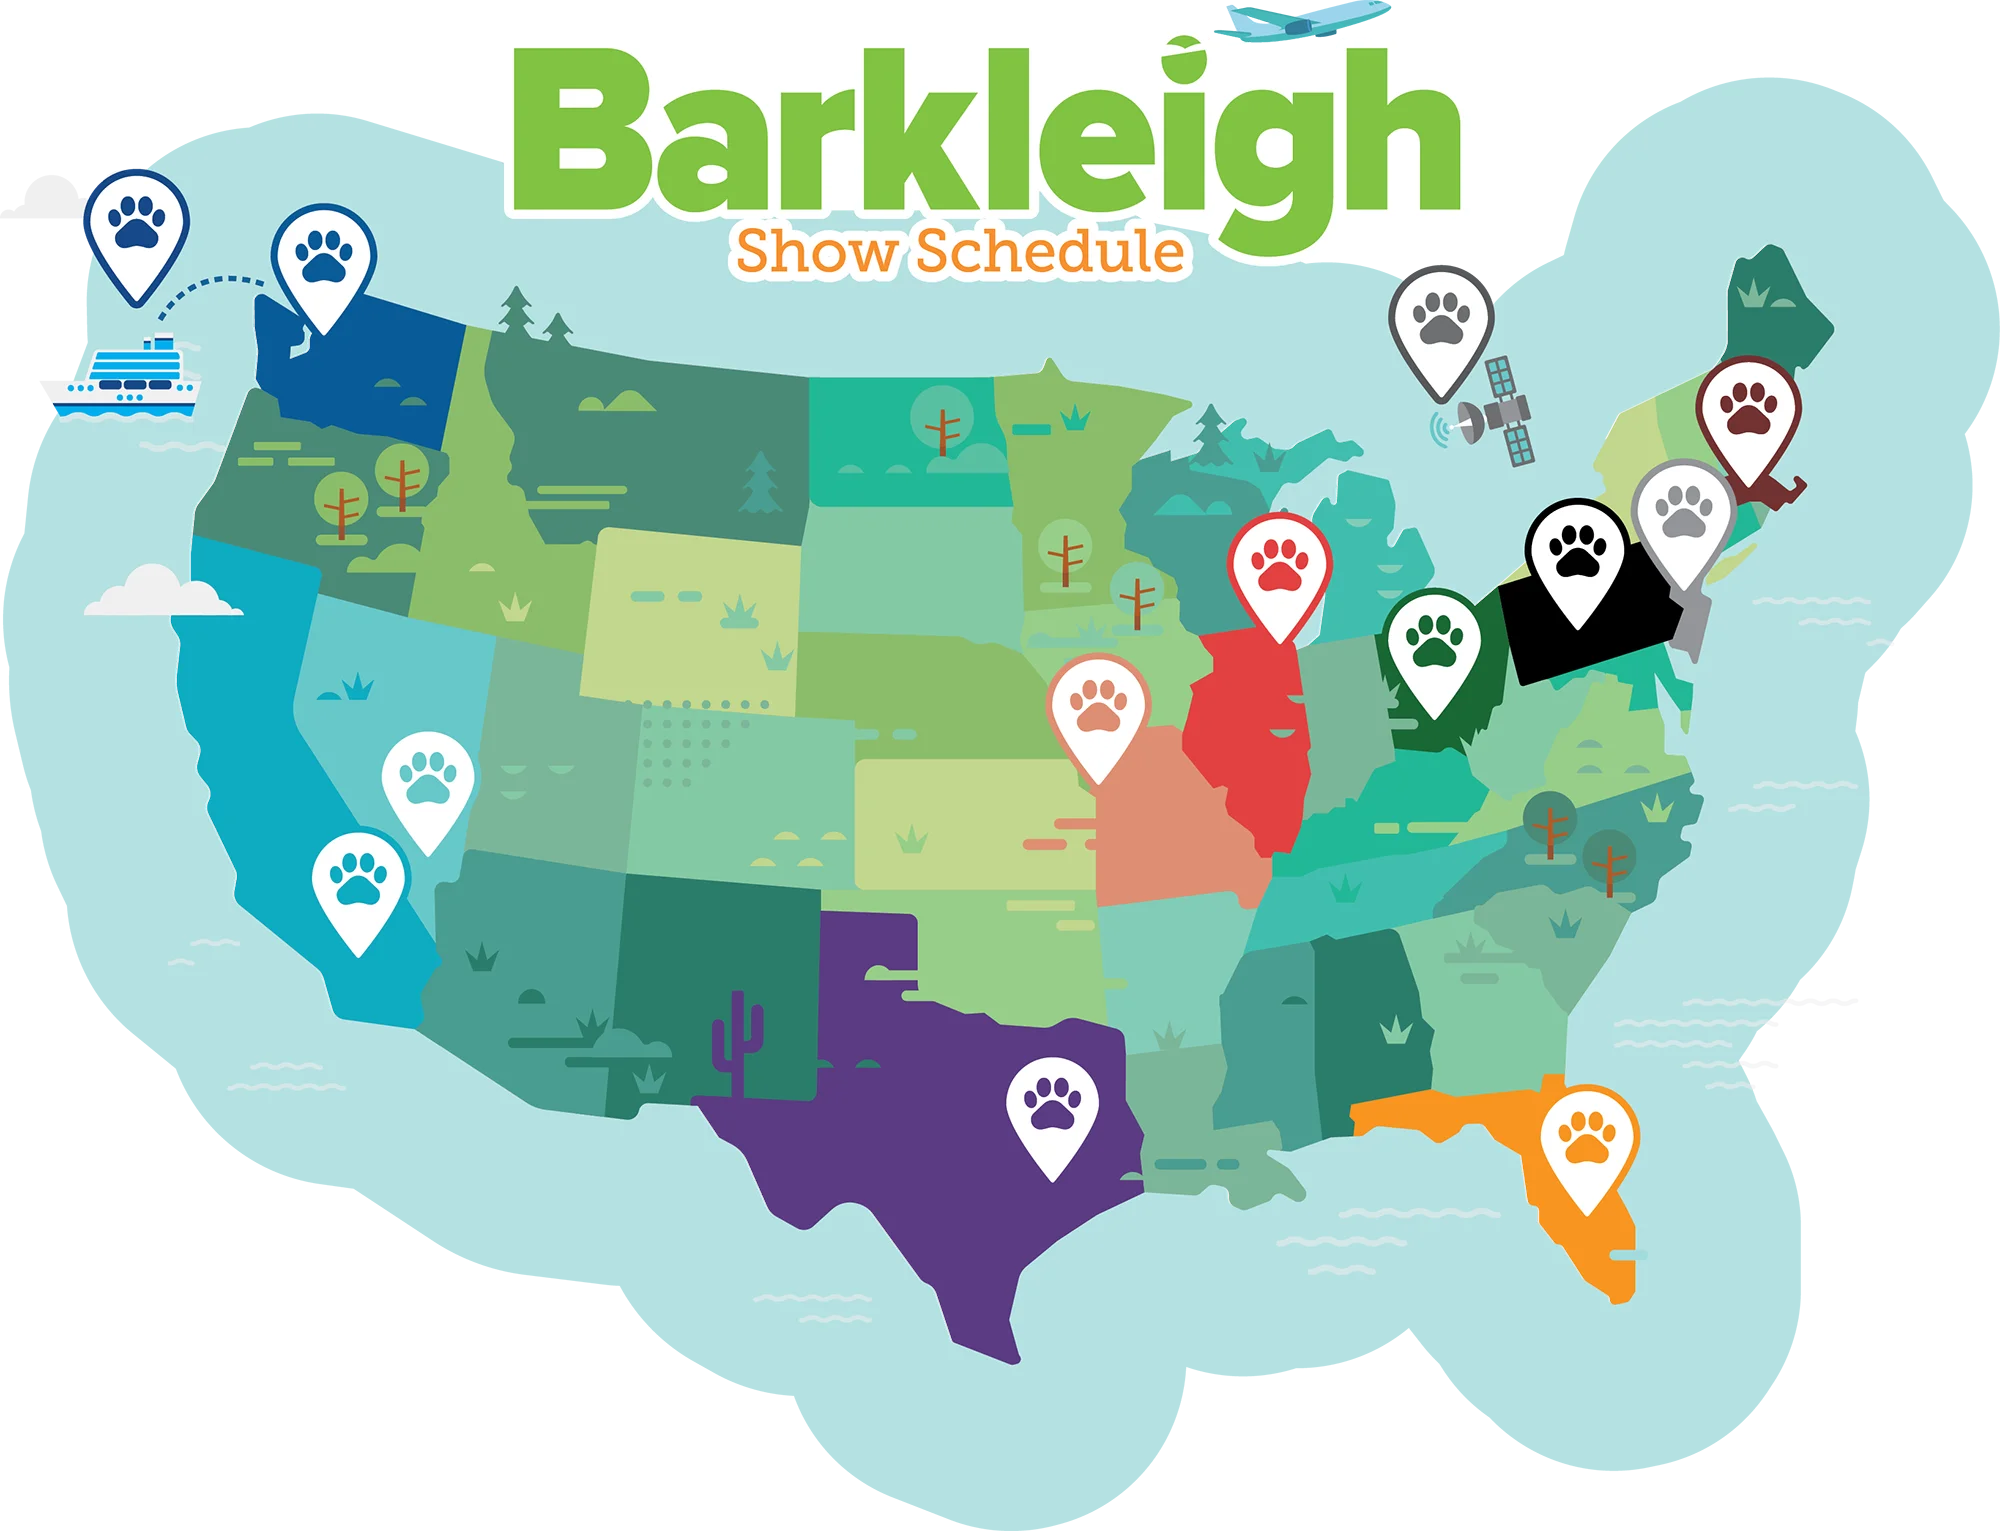 Barkleigh Show Schedule with colorful illustration of map of the united states